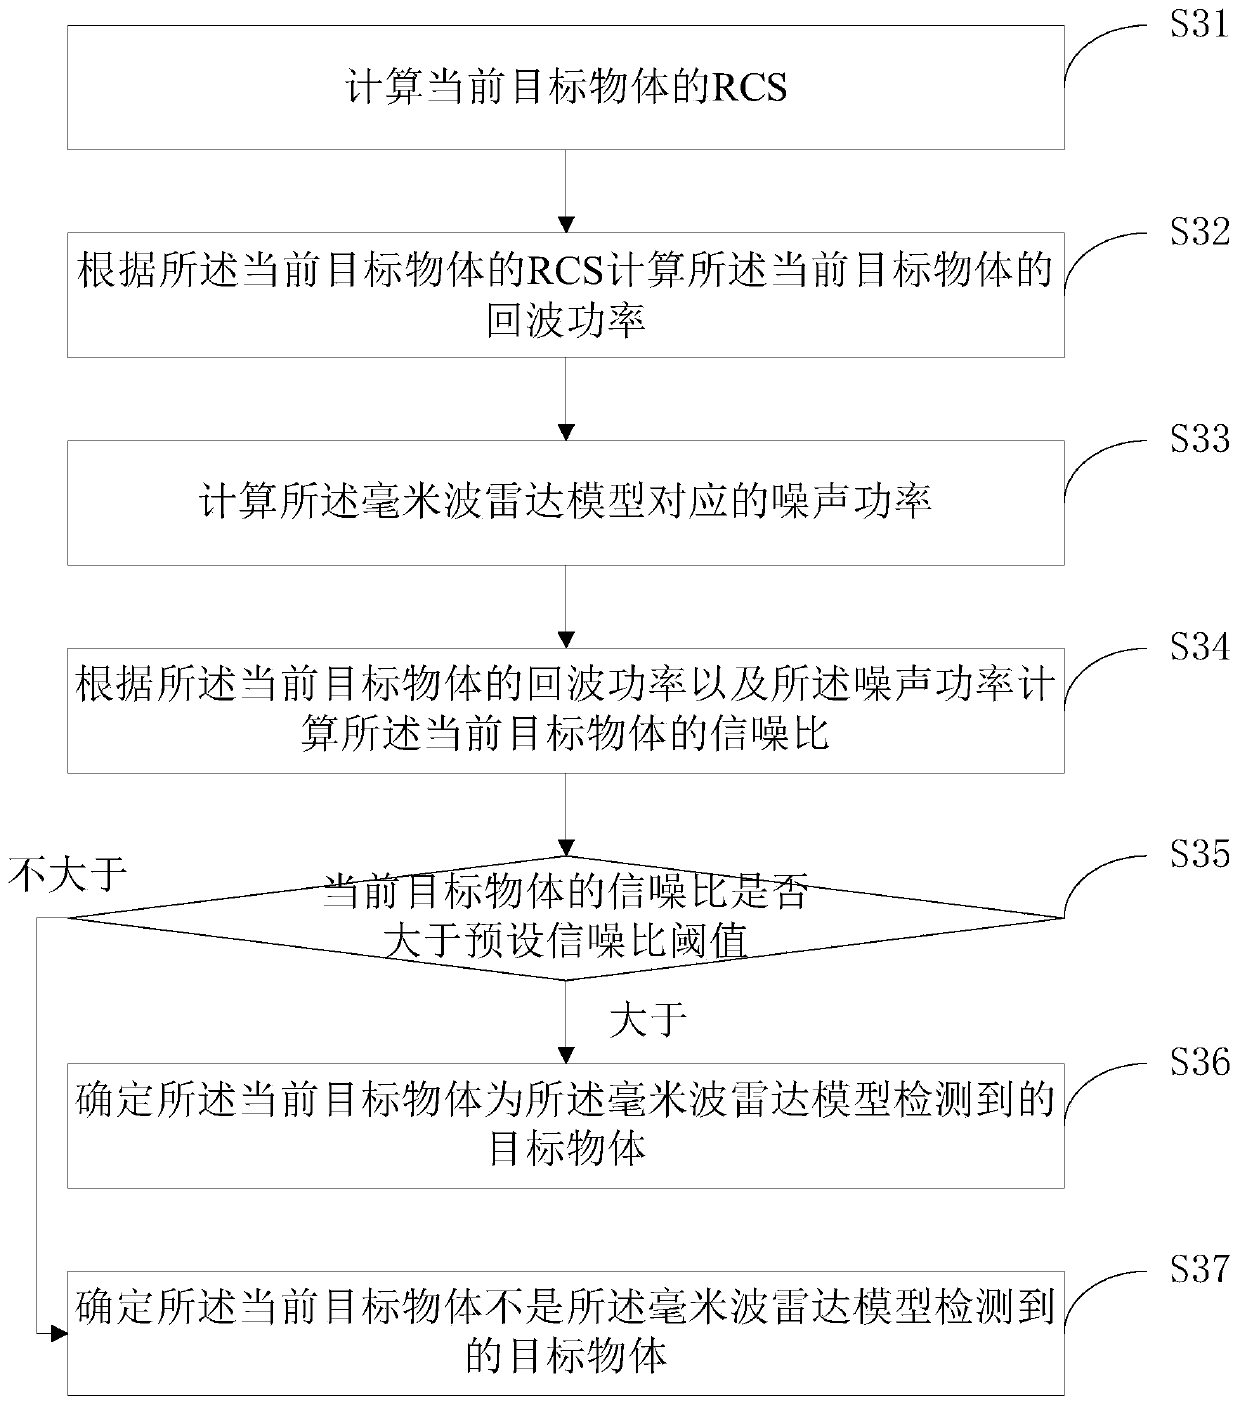 Target object detecting method and device